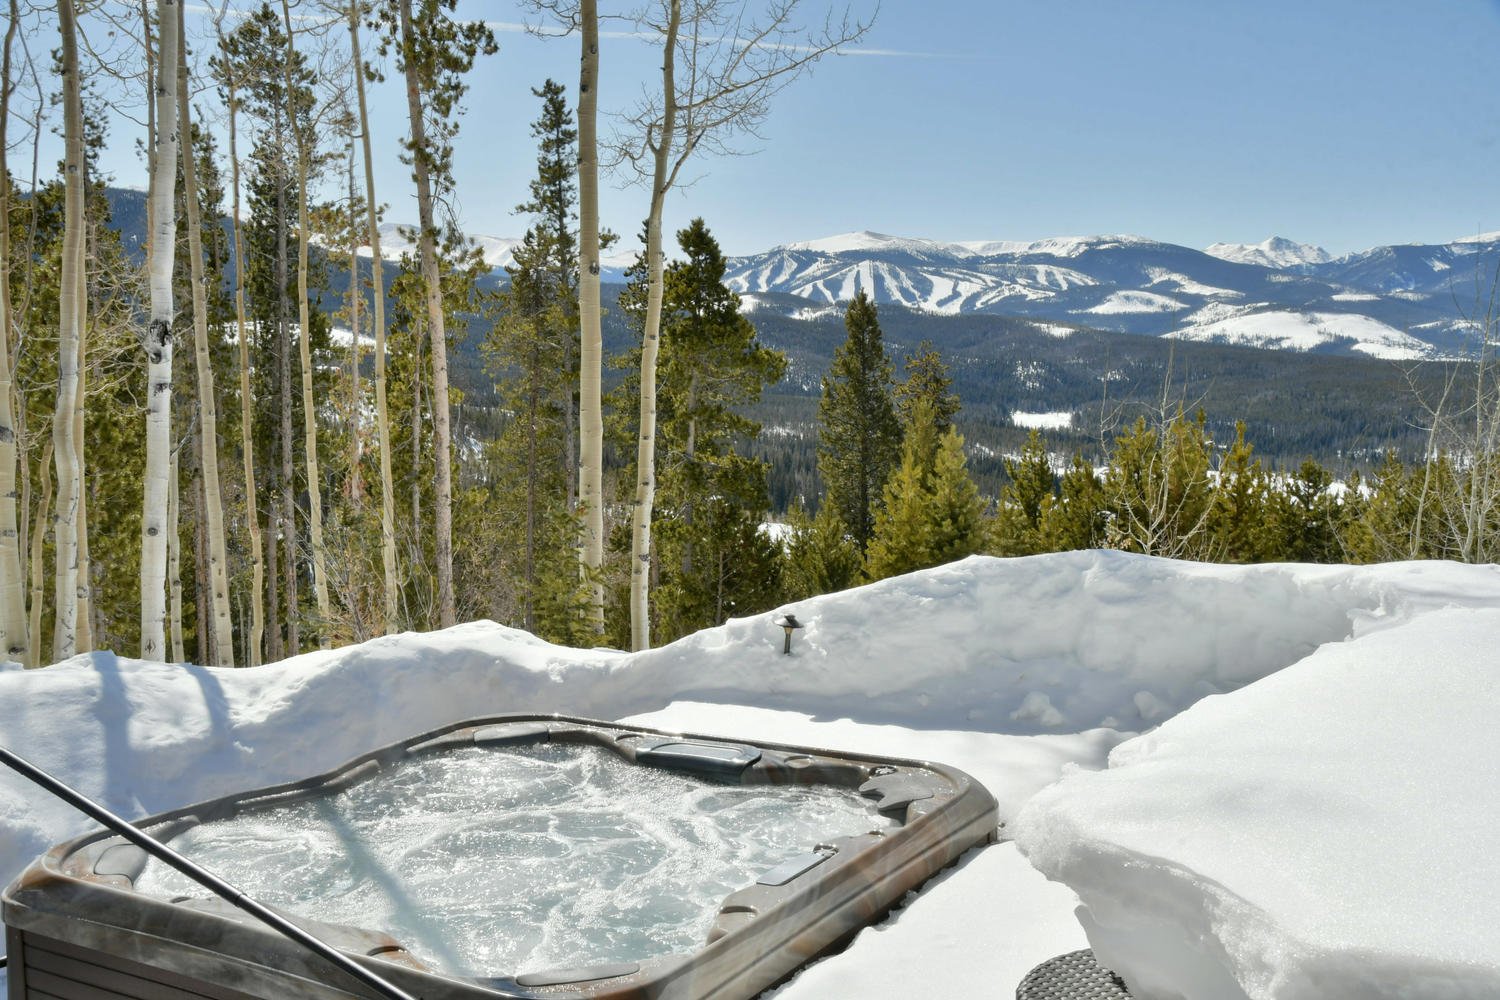 Outdoor Hot Tub with Mountain Views in Our Winter Park Escapes Rental.